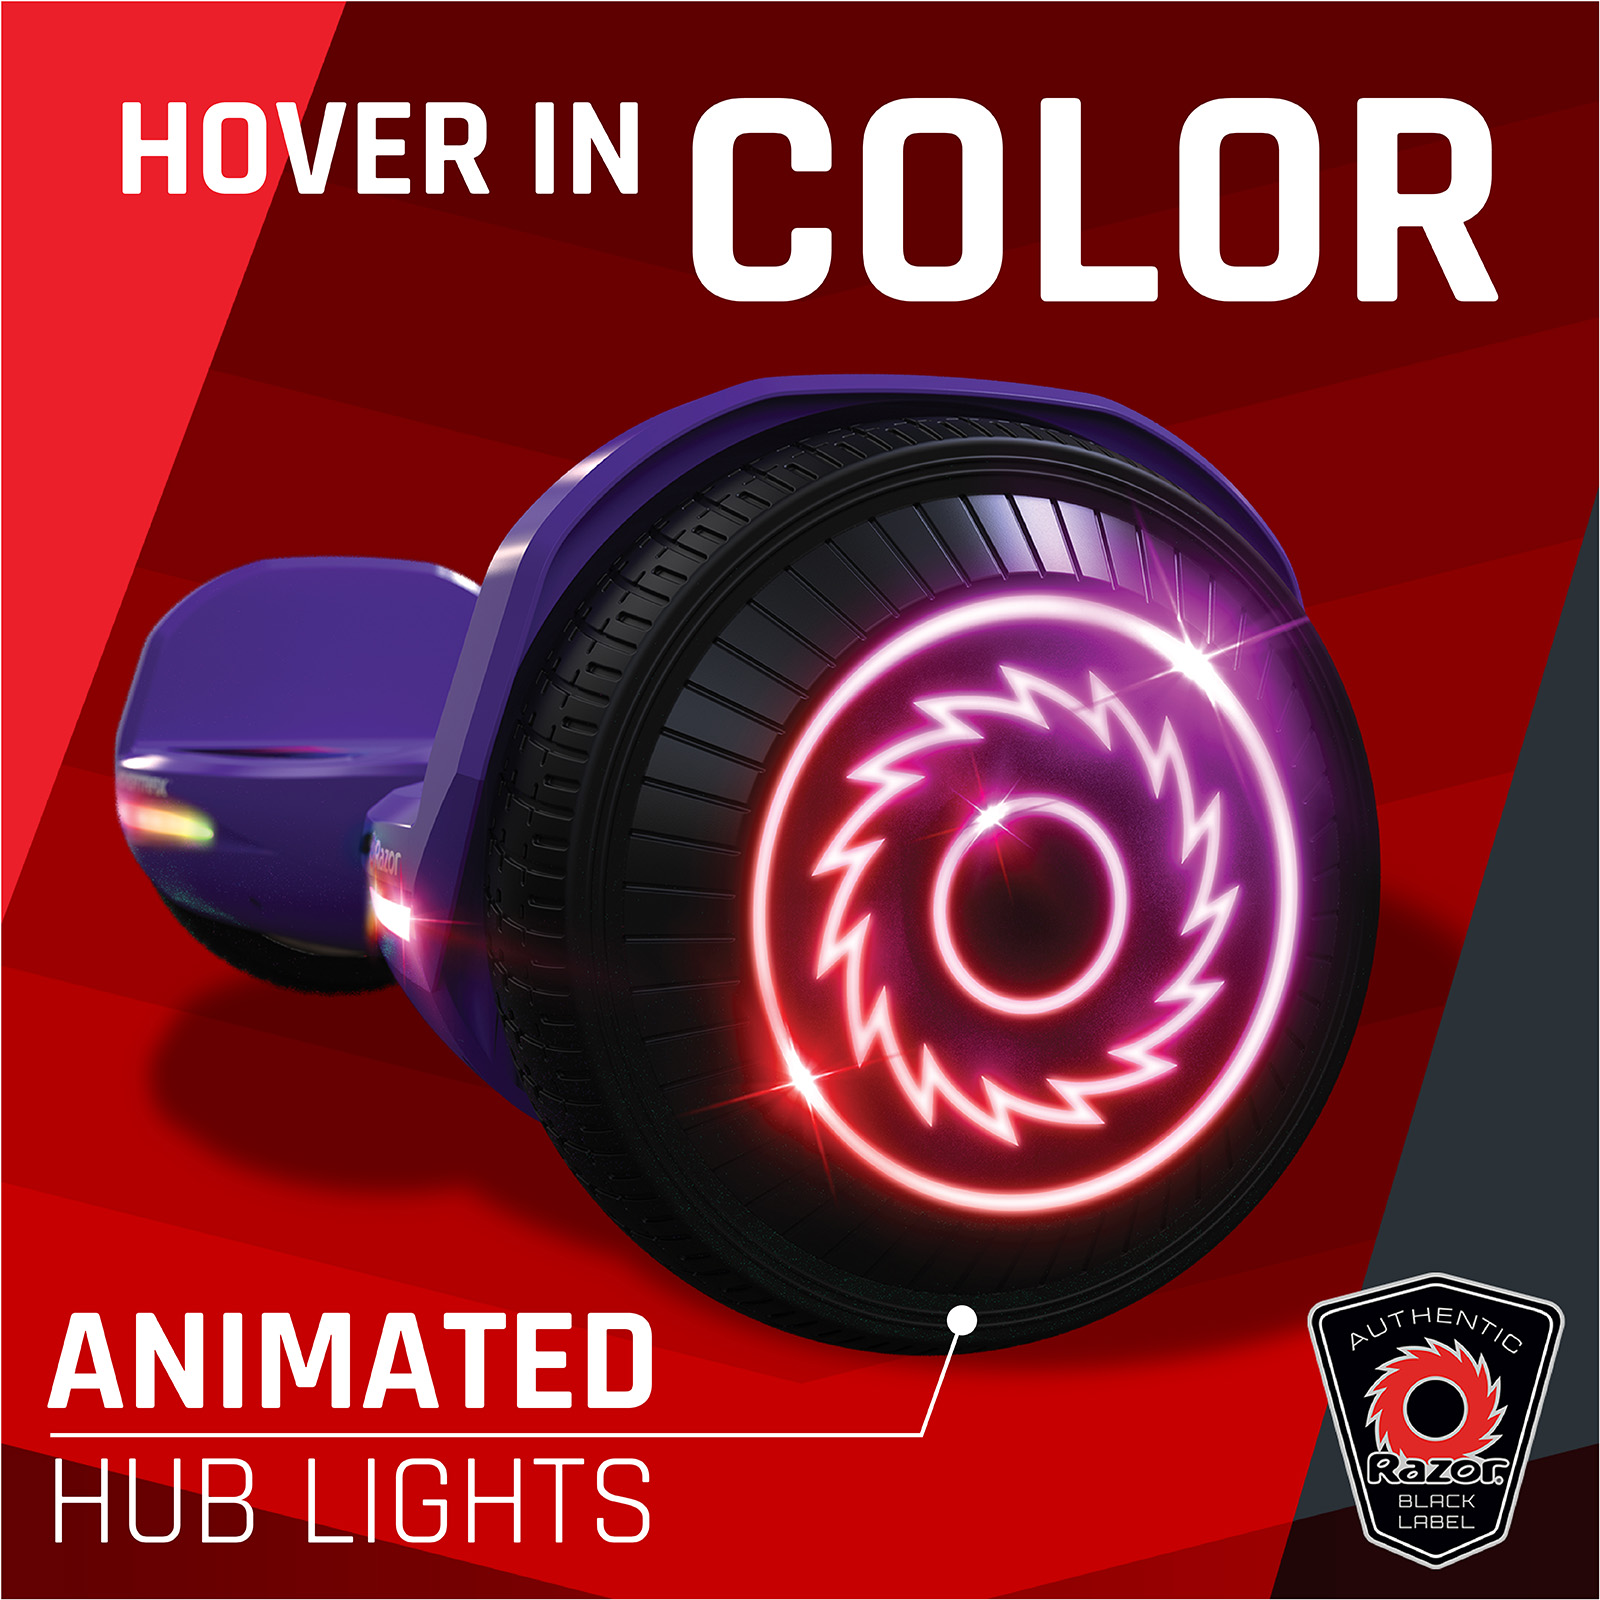 Razor Black Label Hovertrax - Purple, UL2272 Hoverboard for Child Ages 8+, Customizable Color Decals - image 5 of 12